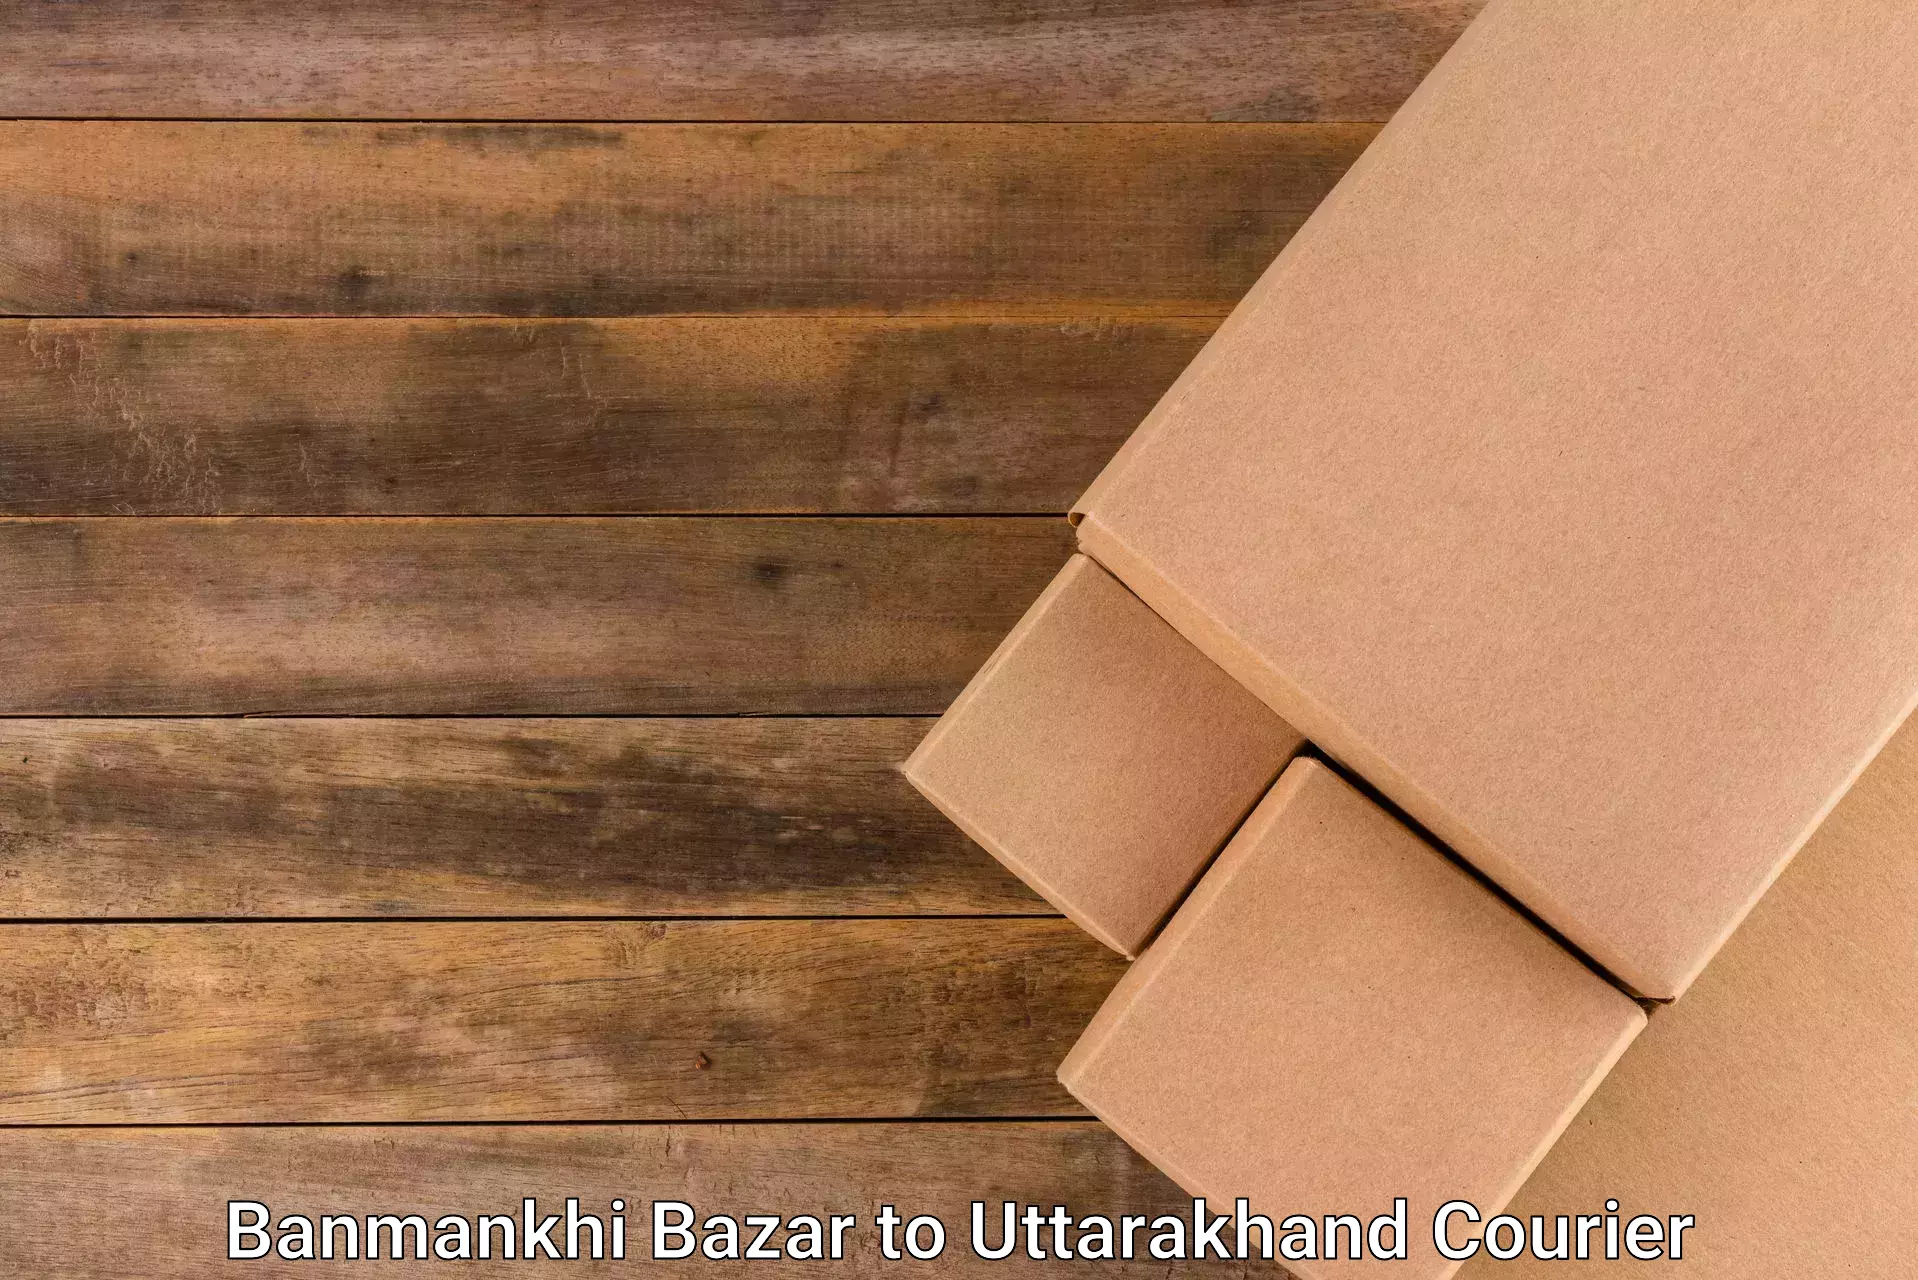 Air courier services Banmankhi Bazar to Champawat